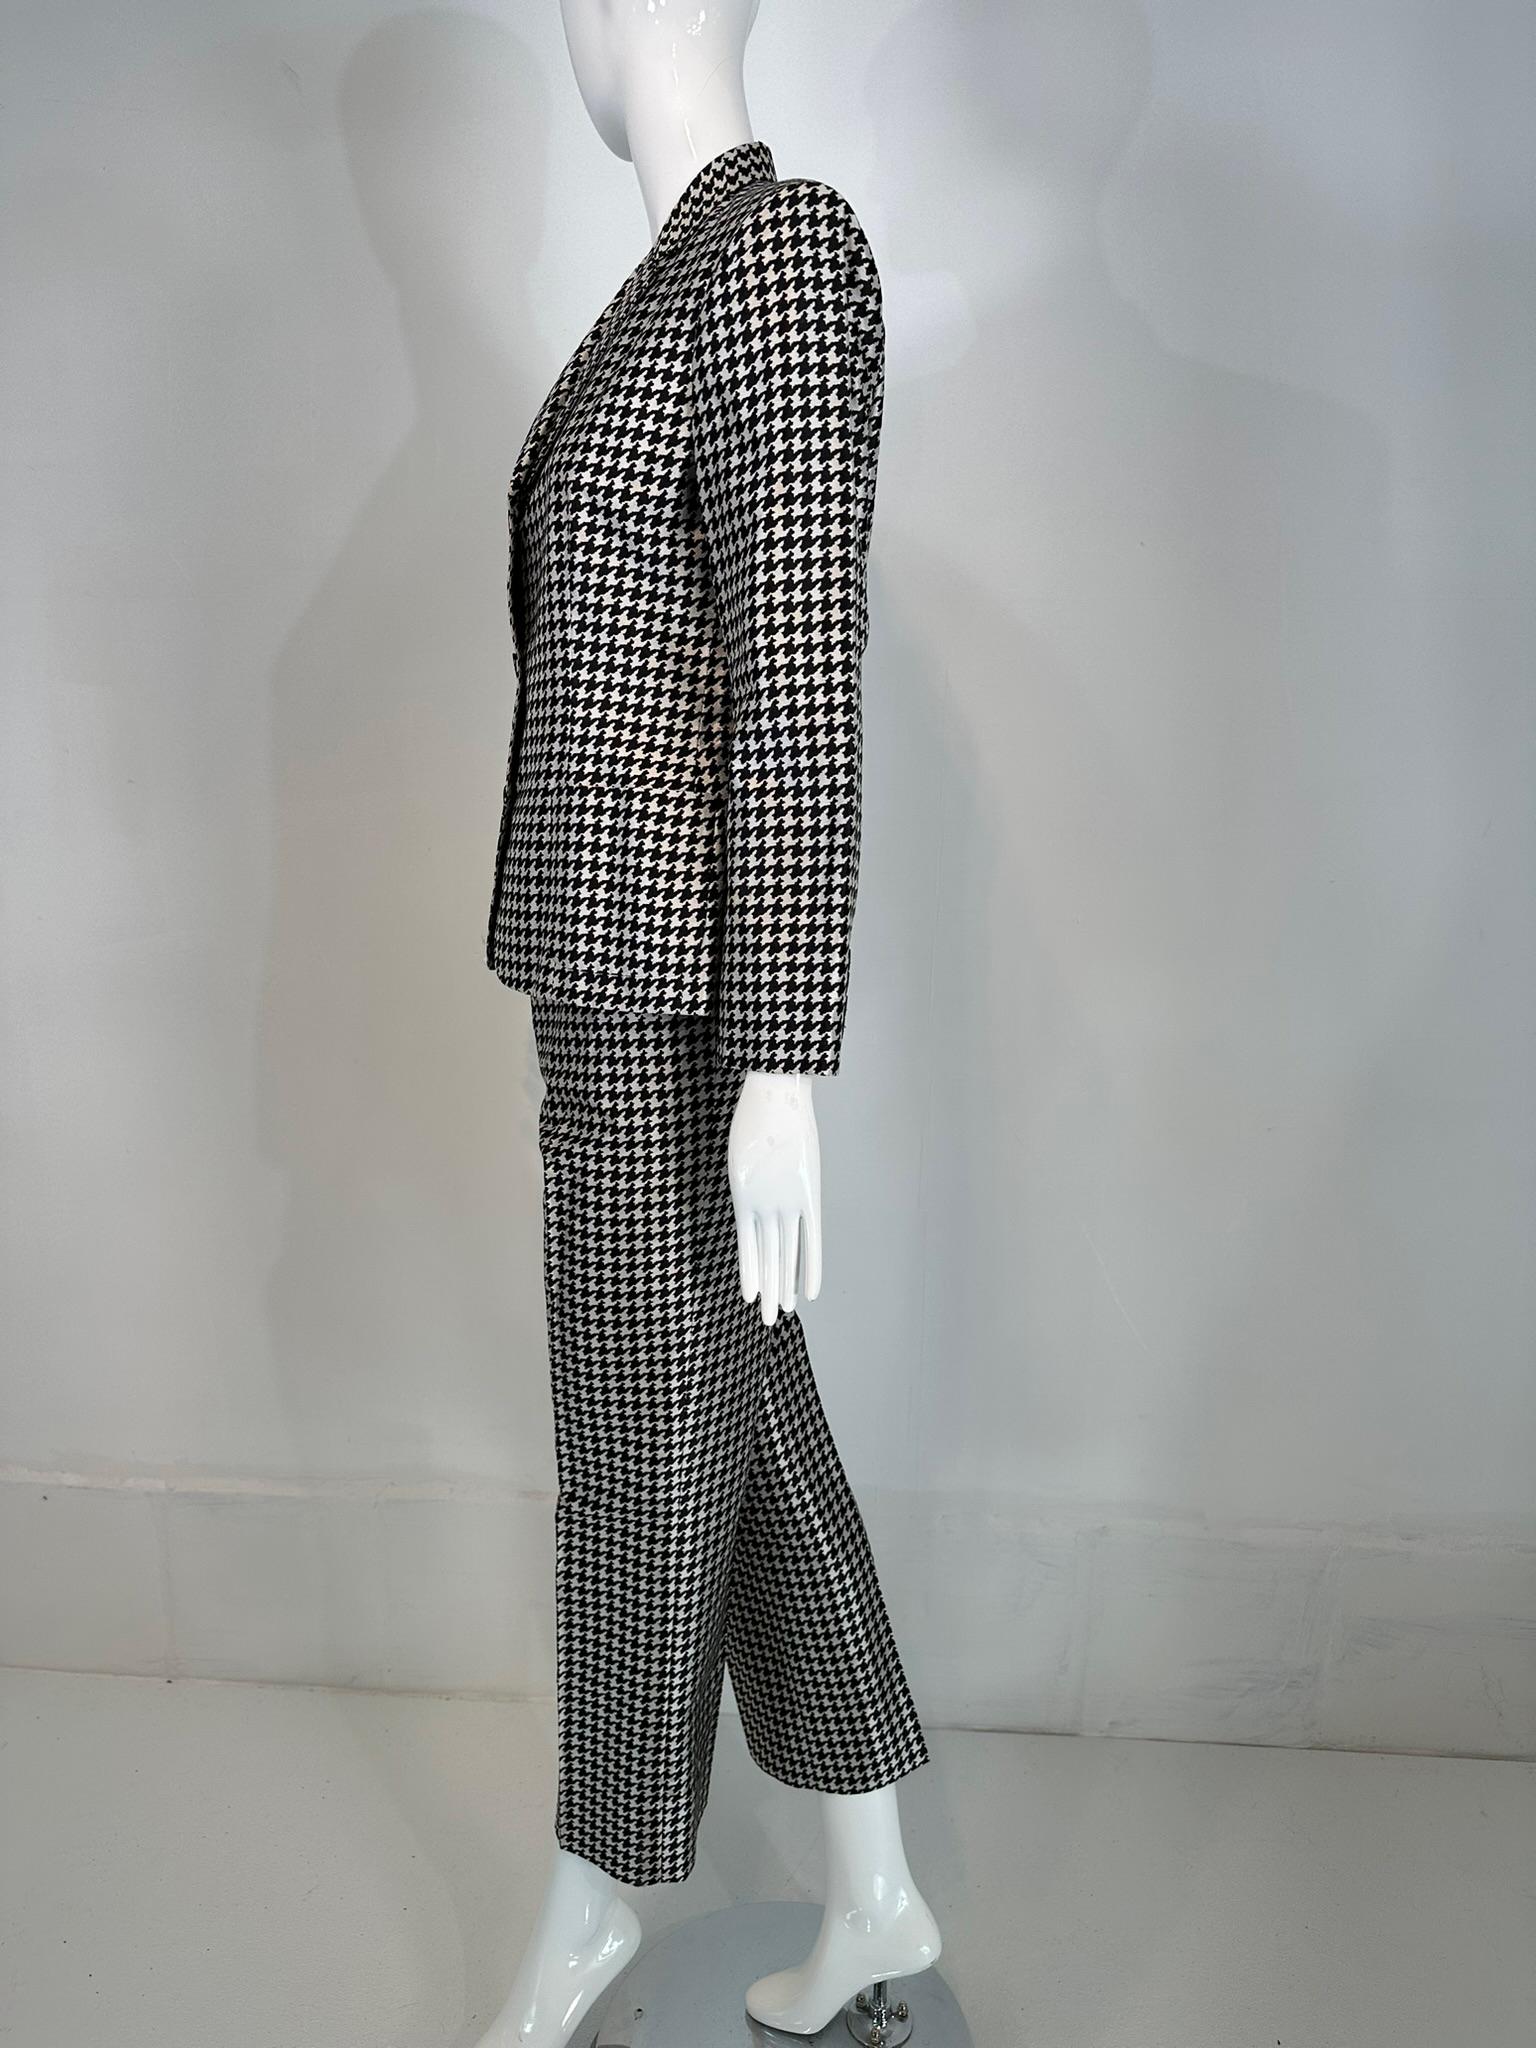 Ralph Lauren Black Label Black & White Silk Hounds Tooth Check Pant Set 10 For Sale 6